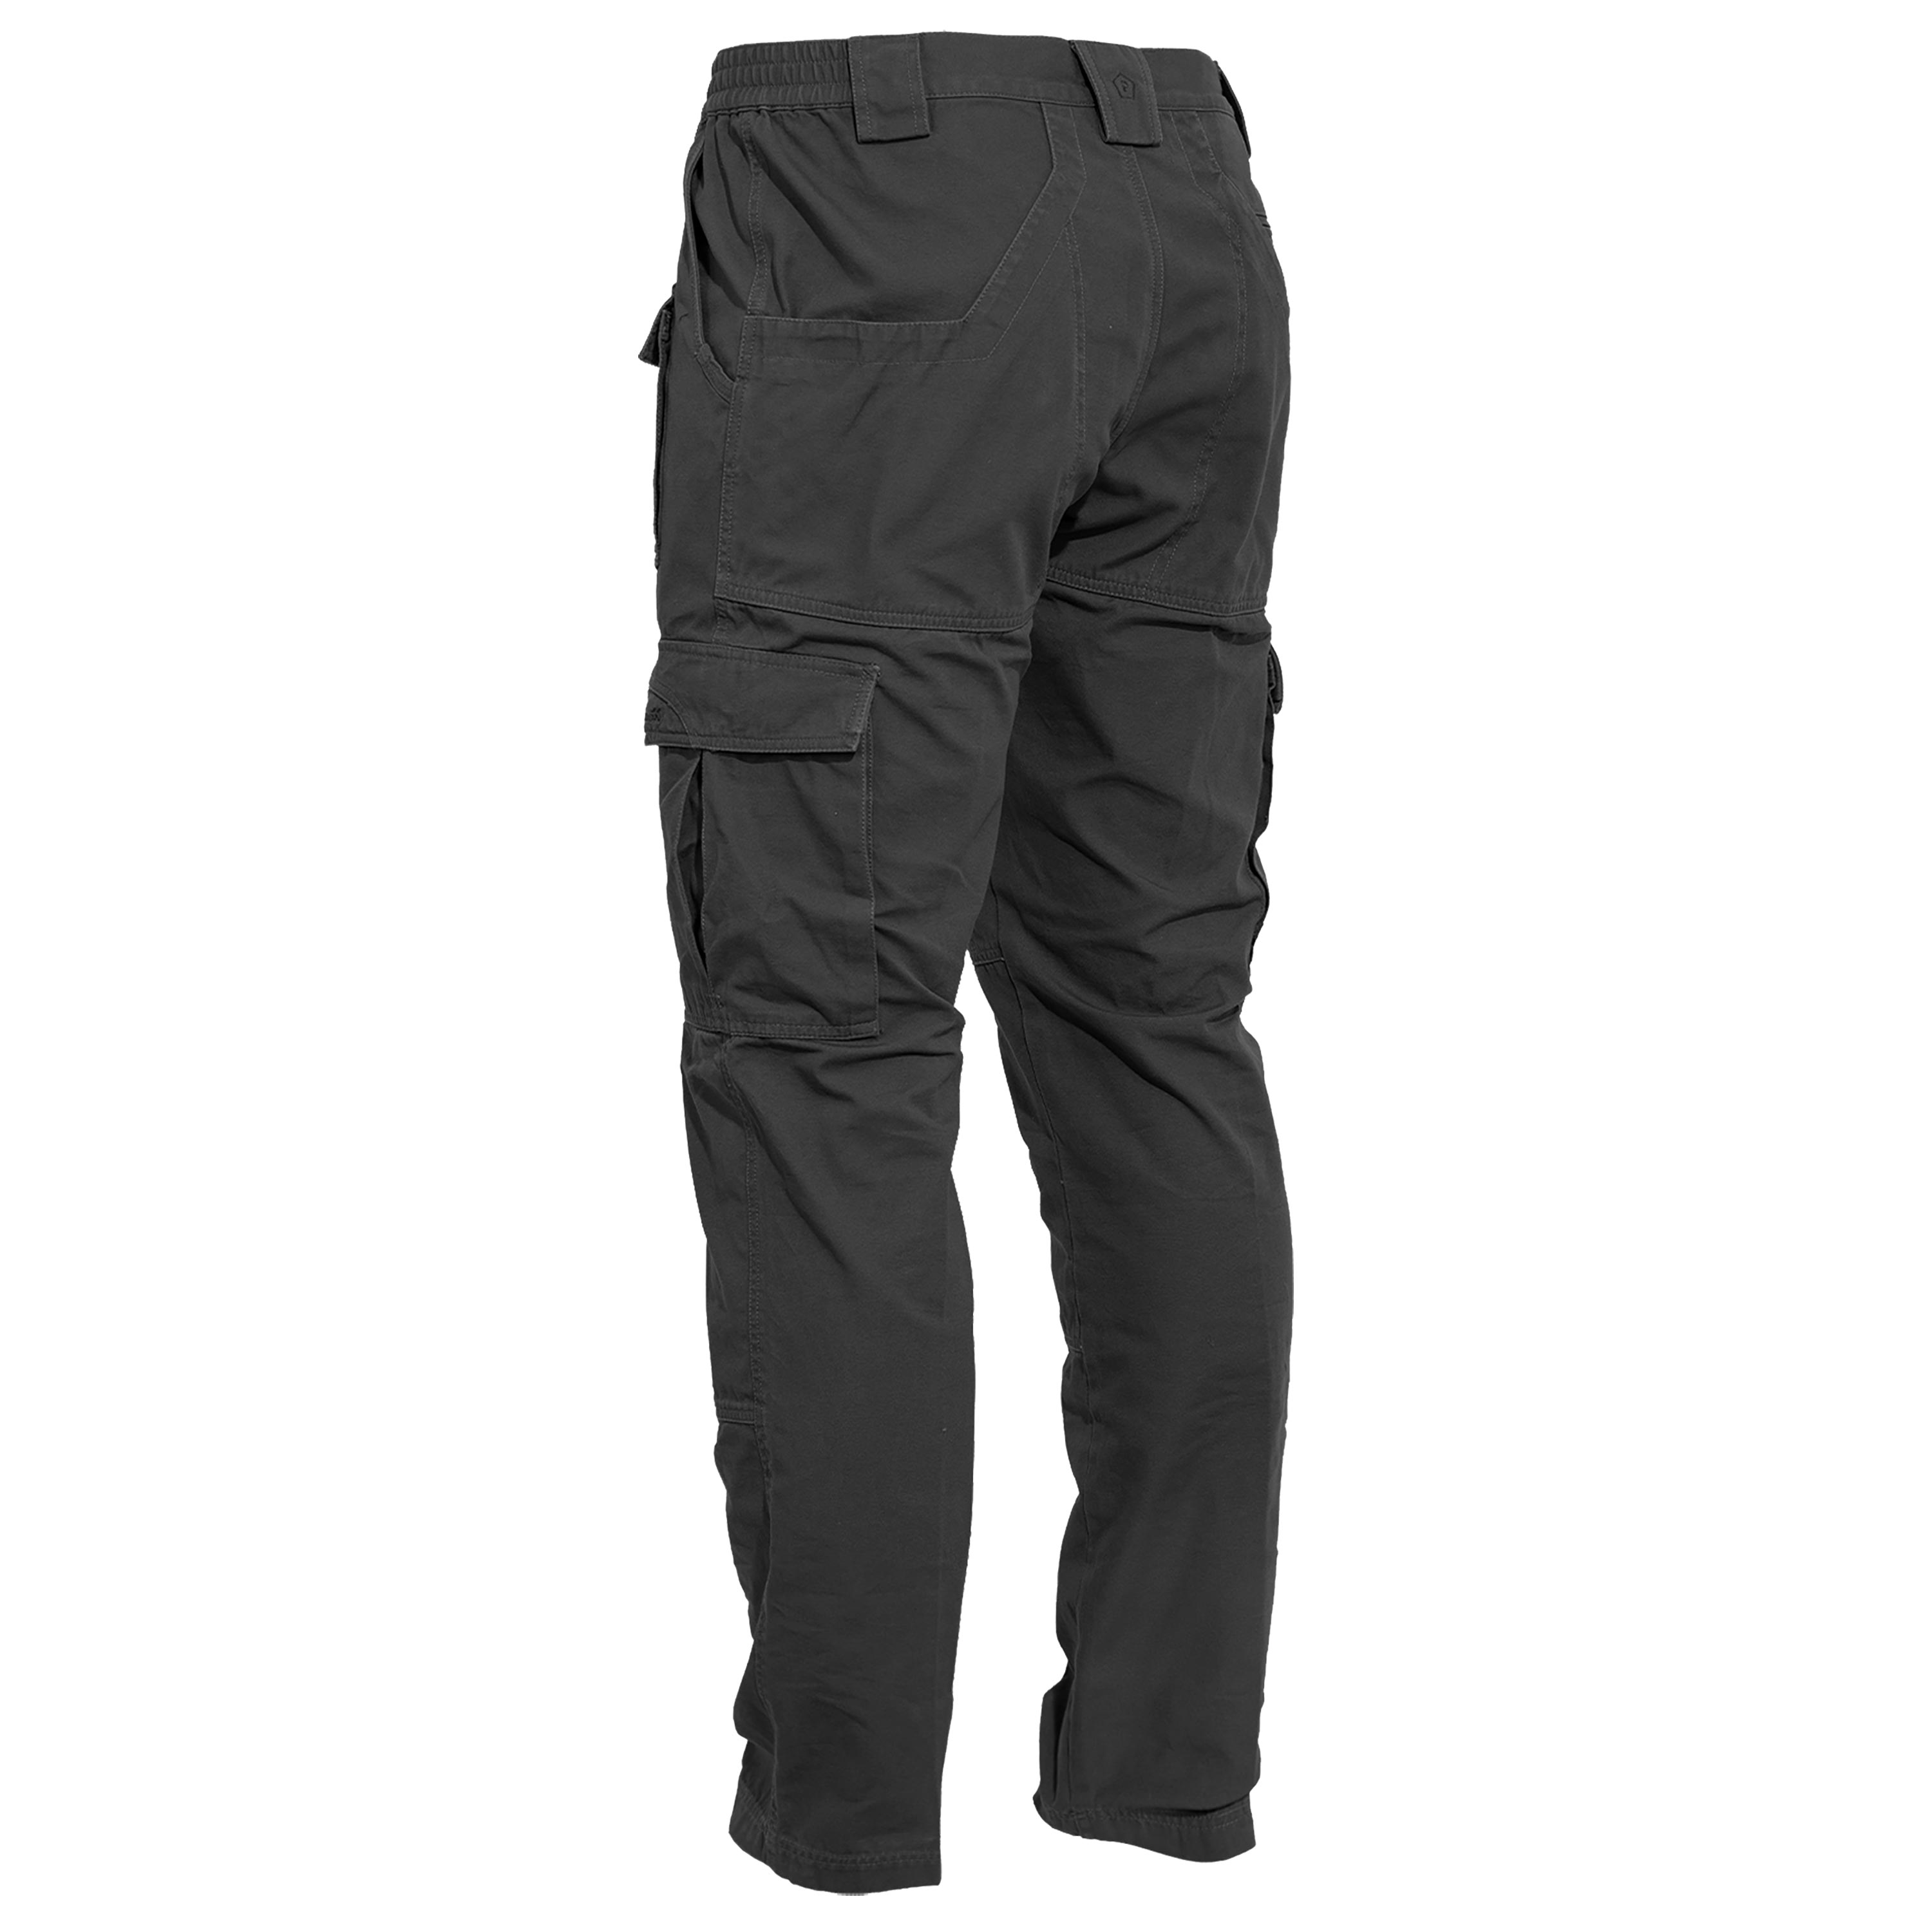 Purchase the Pentagon Pants Elgon 2.0 Tactical black by ASMC